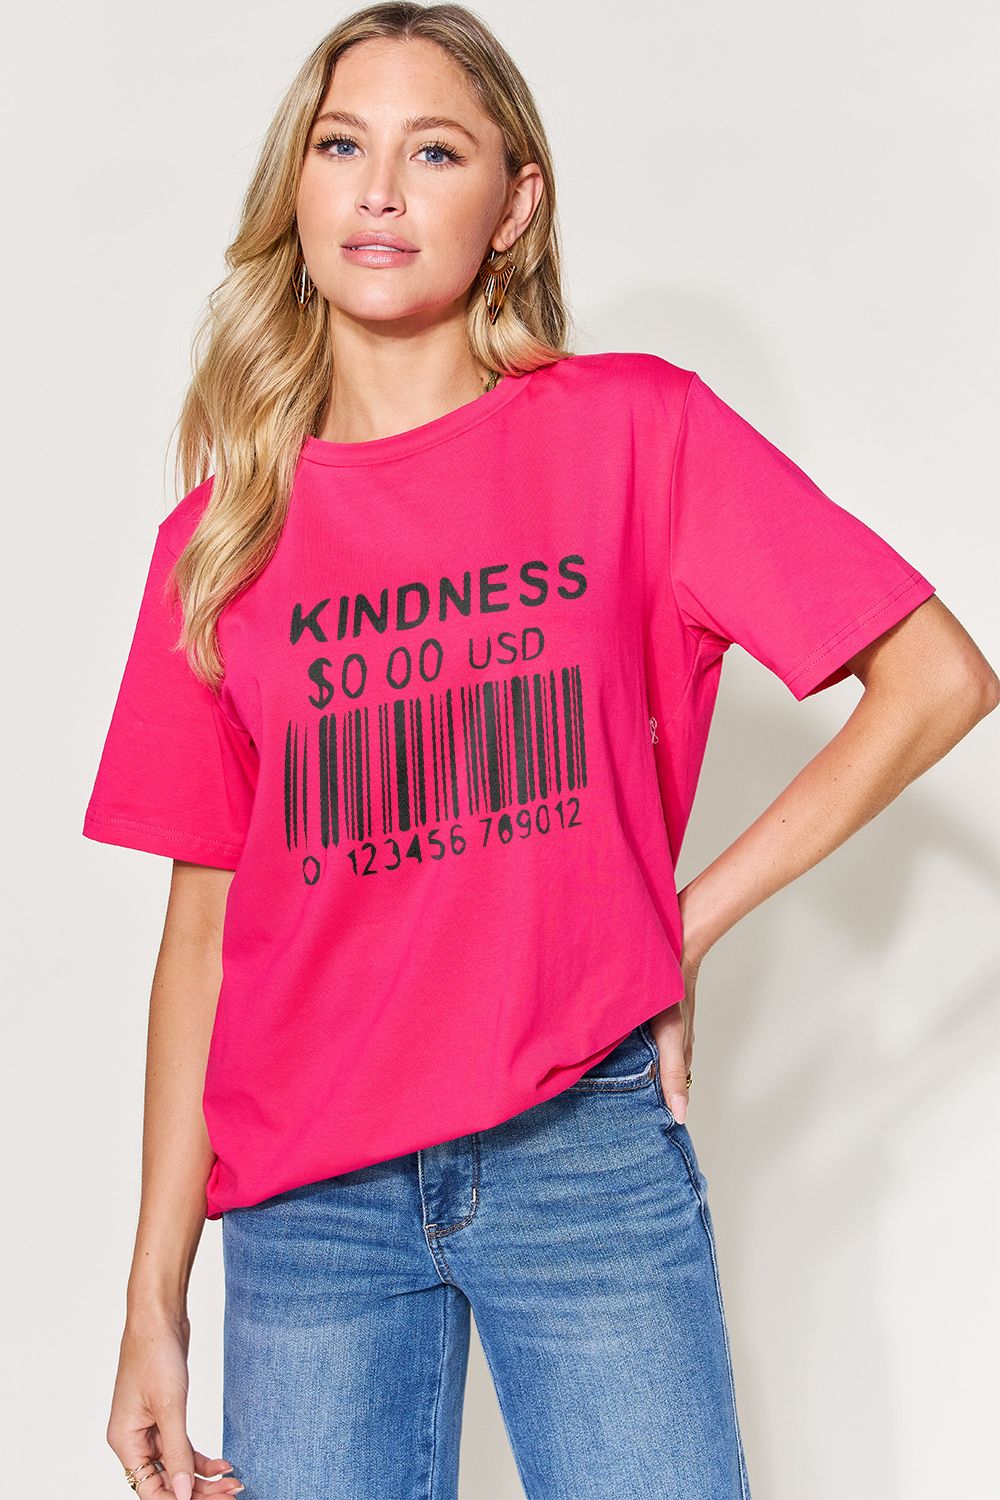 KINDNESS IS FREE Round Neck Graphic T-Shirt - Sydney So Sweet